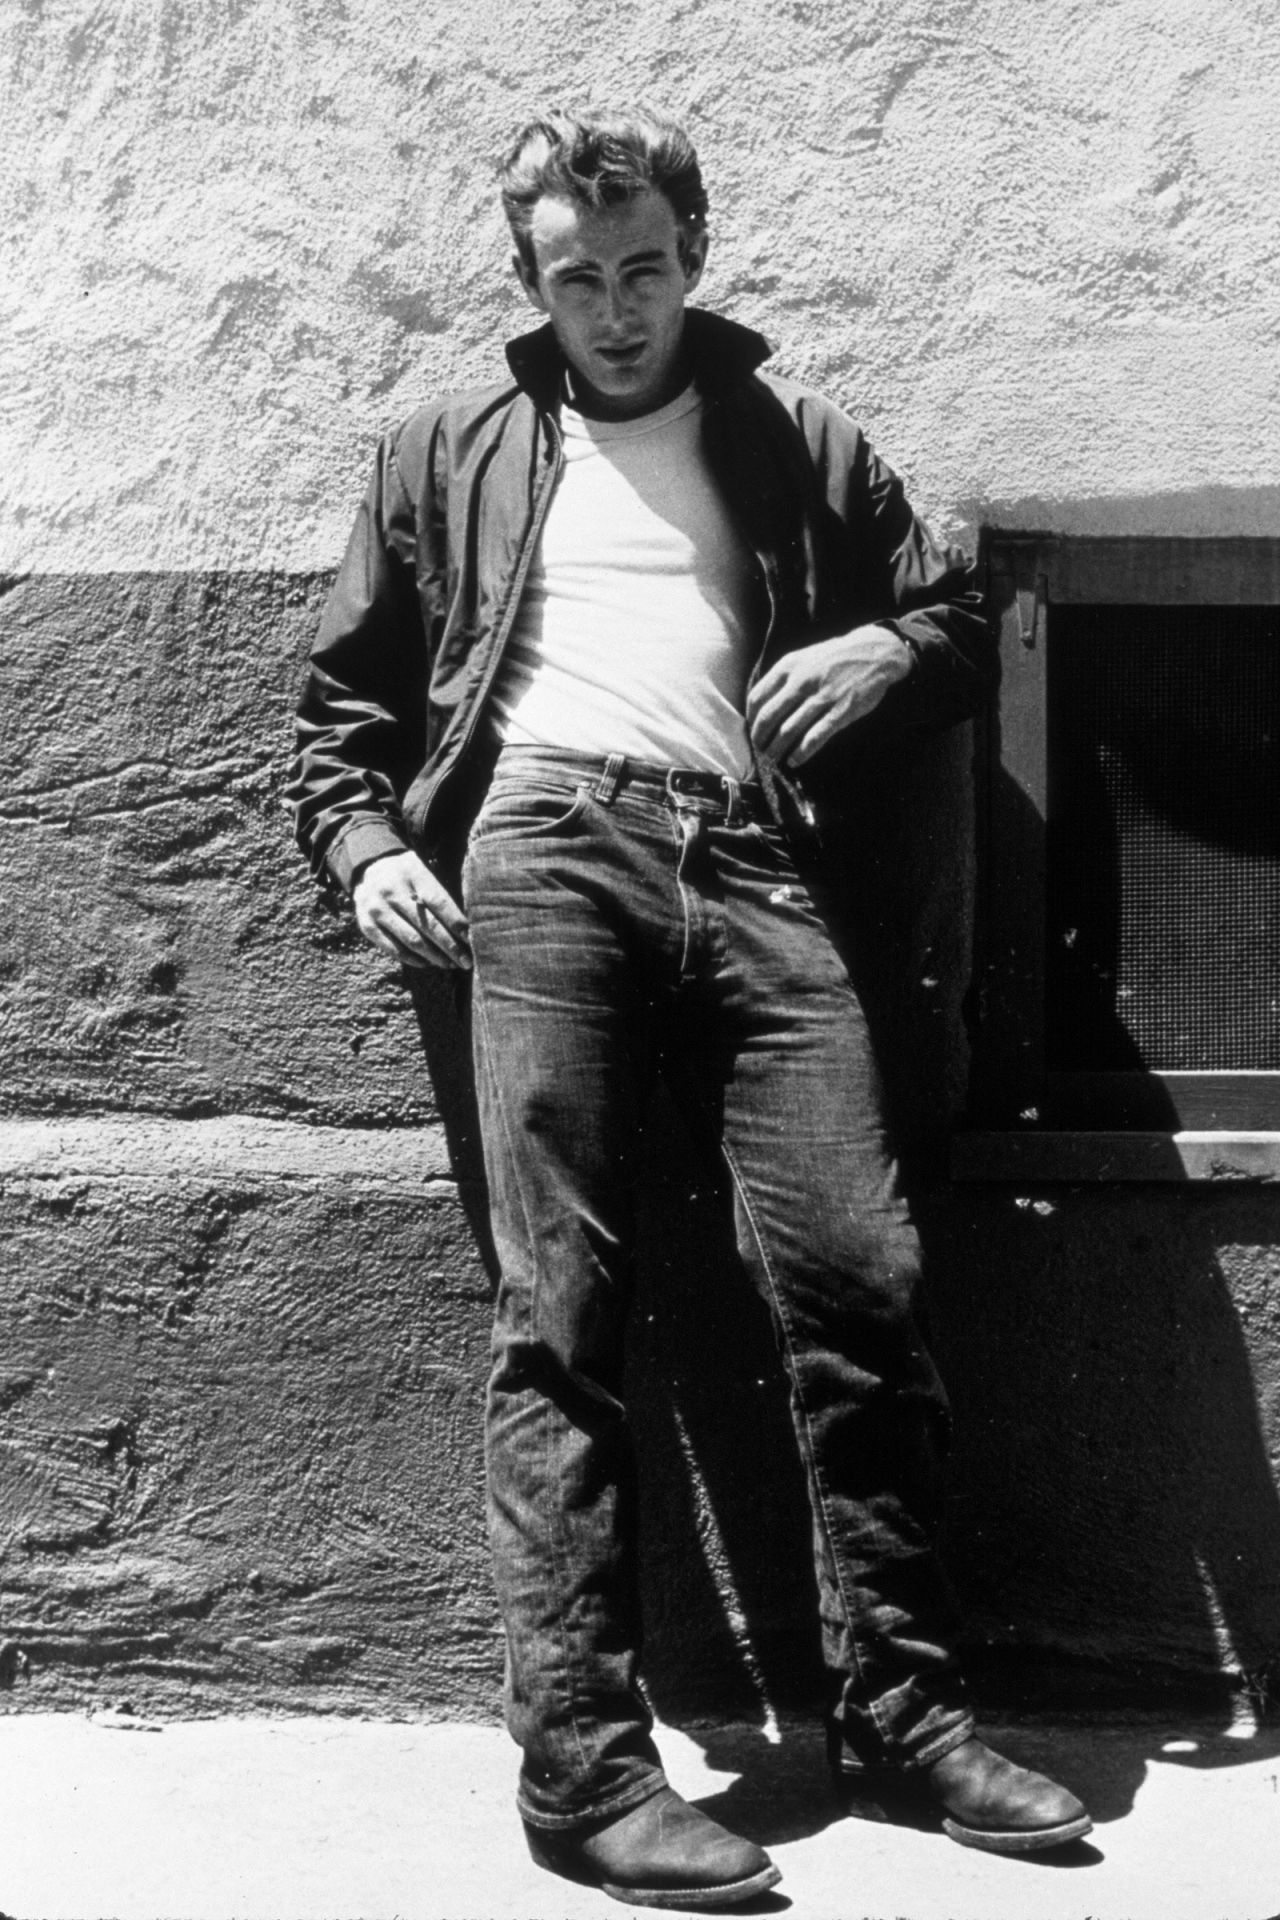 Editorial use only
James Dean is pictured on the set of the 1955 movie "Rebel Without a Cause," wearing a classic white T-Shirt, Levi's jeans and a leather jacket. Dean embodied a style aspirational to many '50s teens.